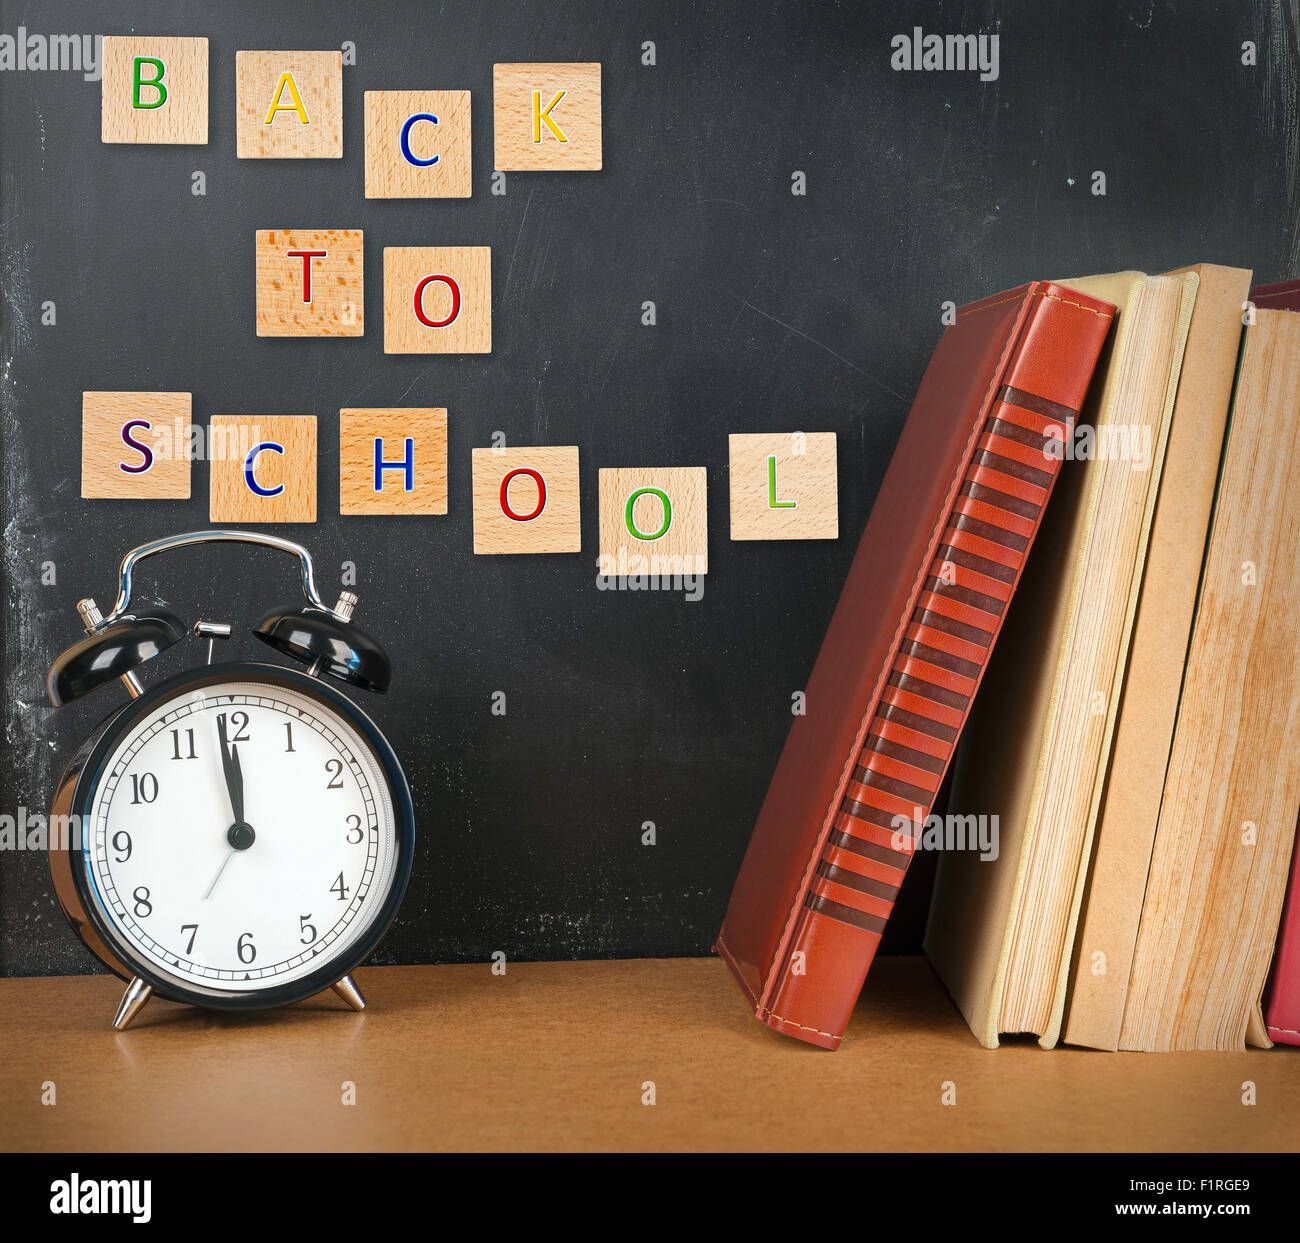 Back to school background with books, alarm clock and inscription Stock Photo